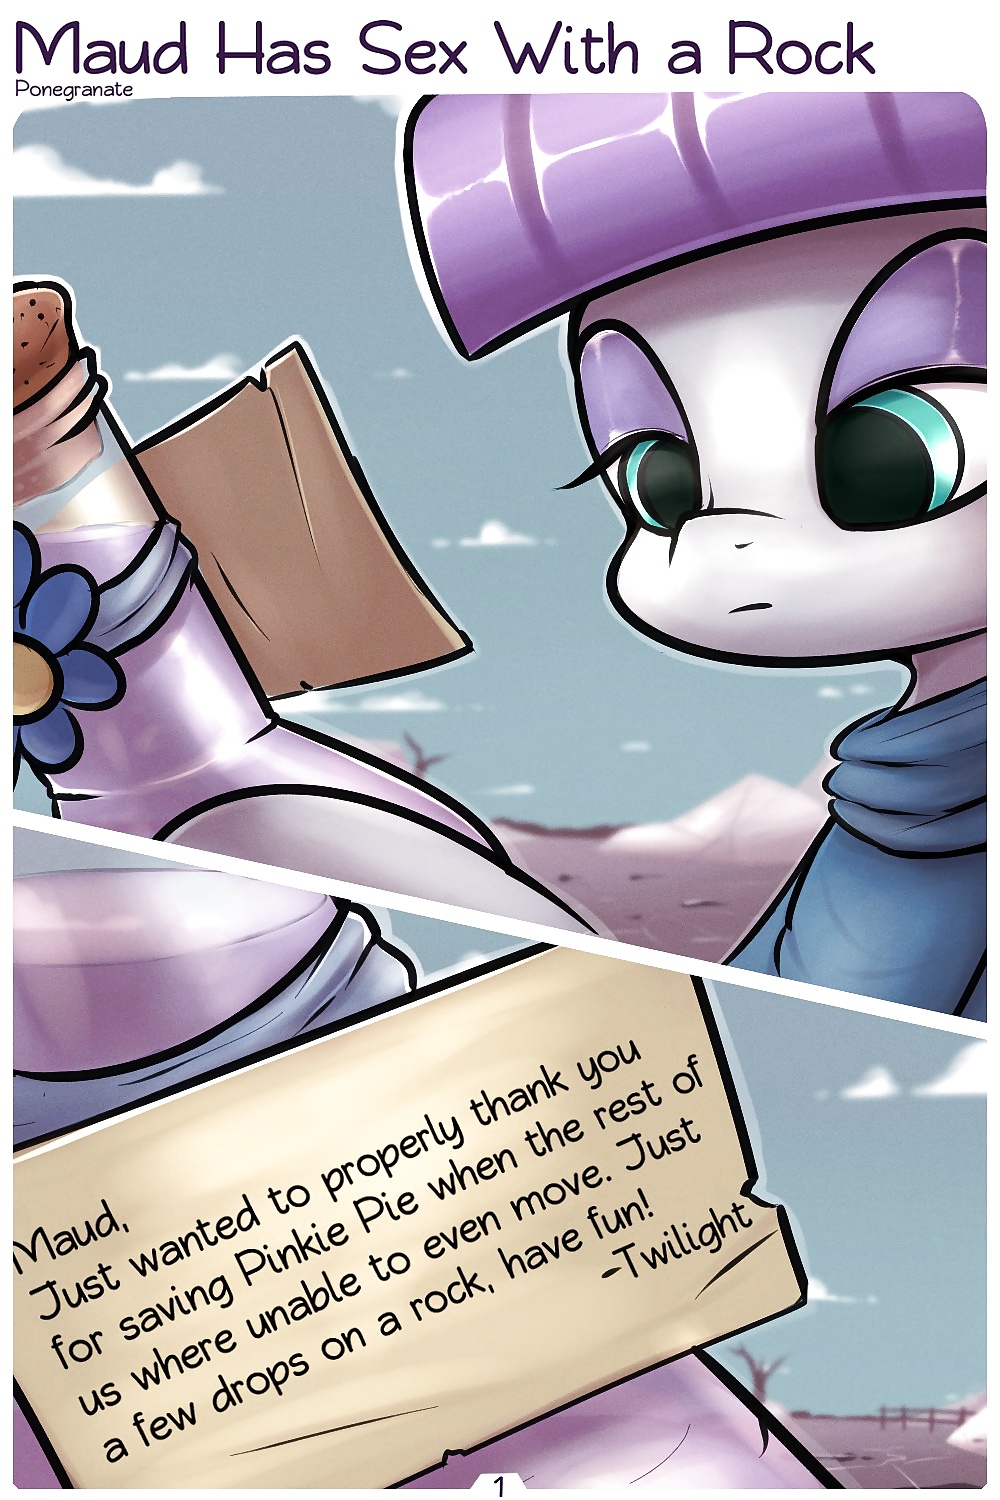 Twilight sent me a gift and I had sex with a rock. #26613257